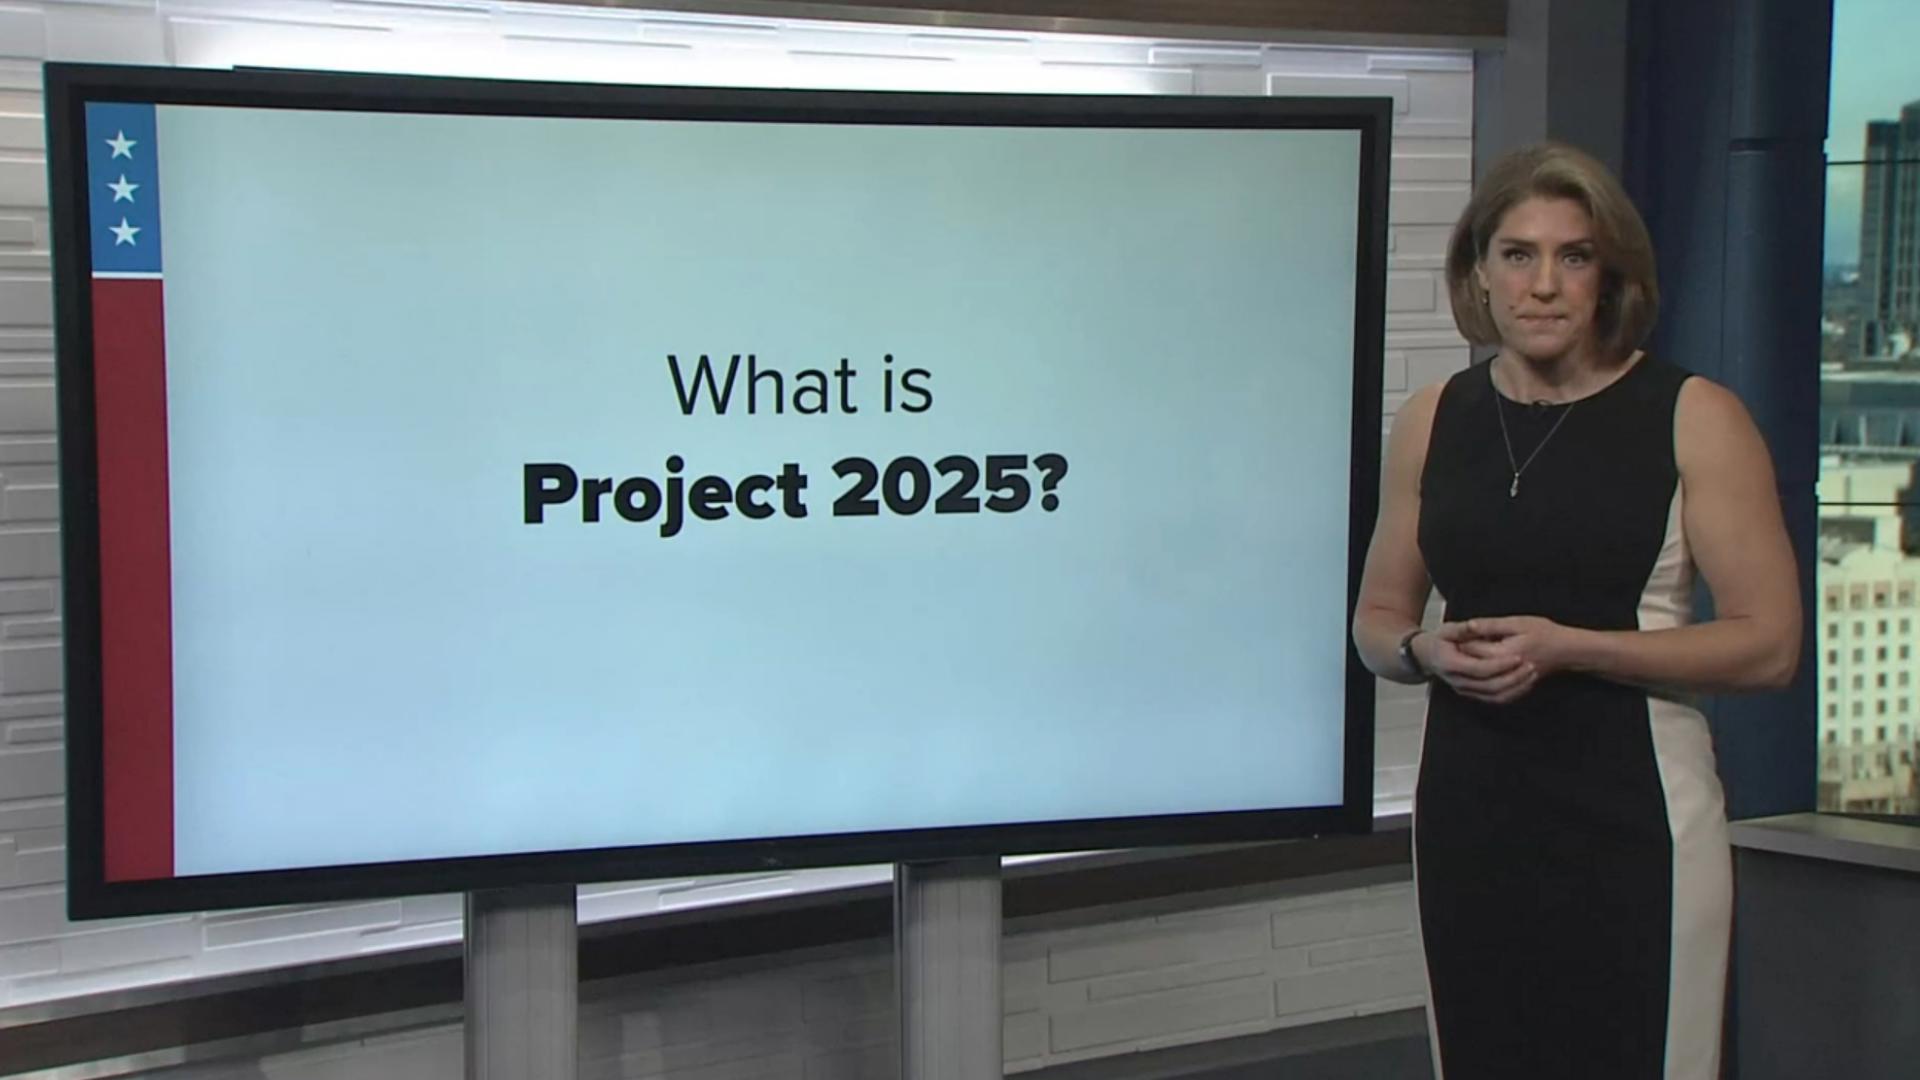 Project 2025 is a blueprint by former Trump administration officials for a dramatic overhaul of the United States government.